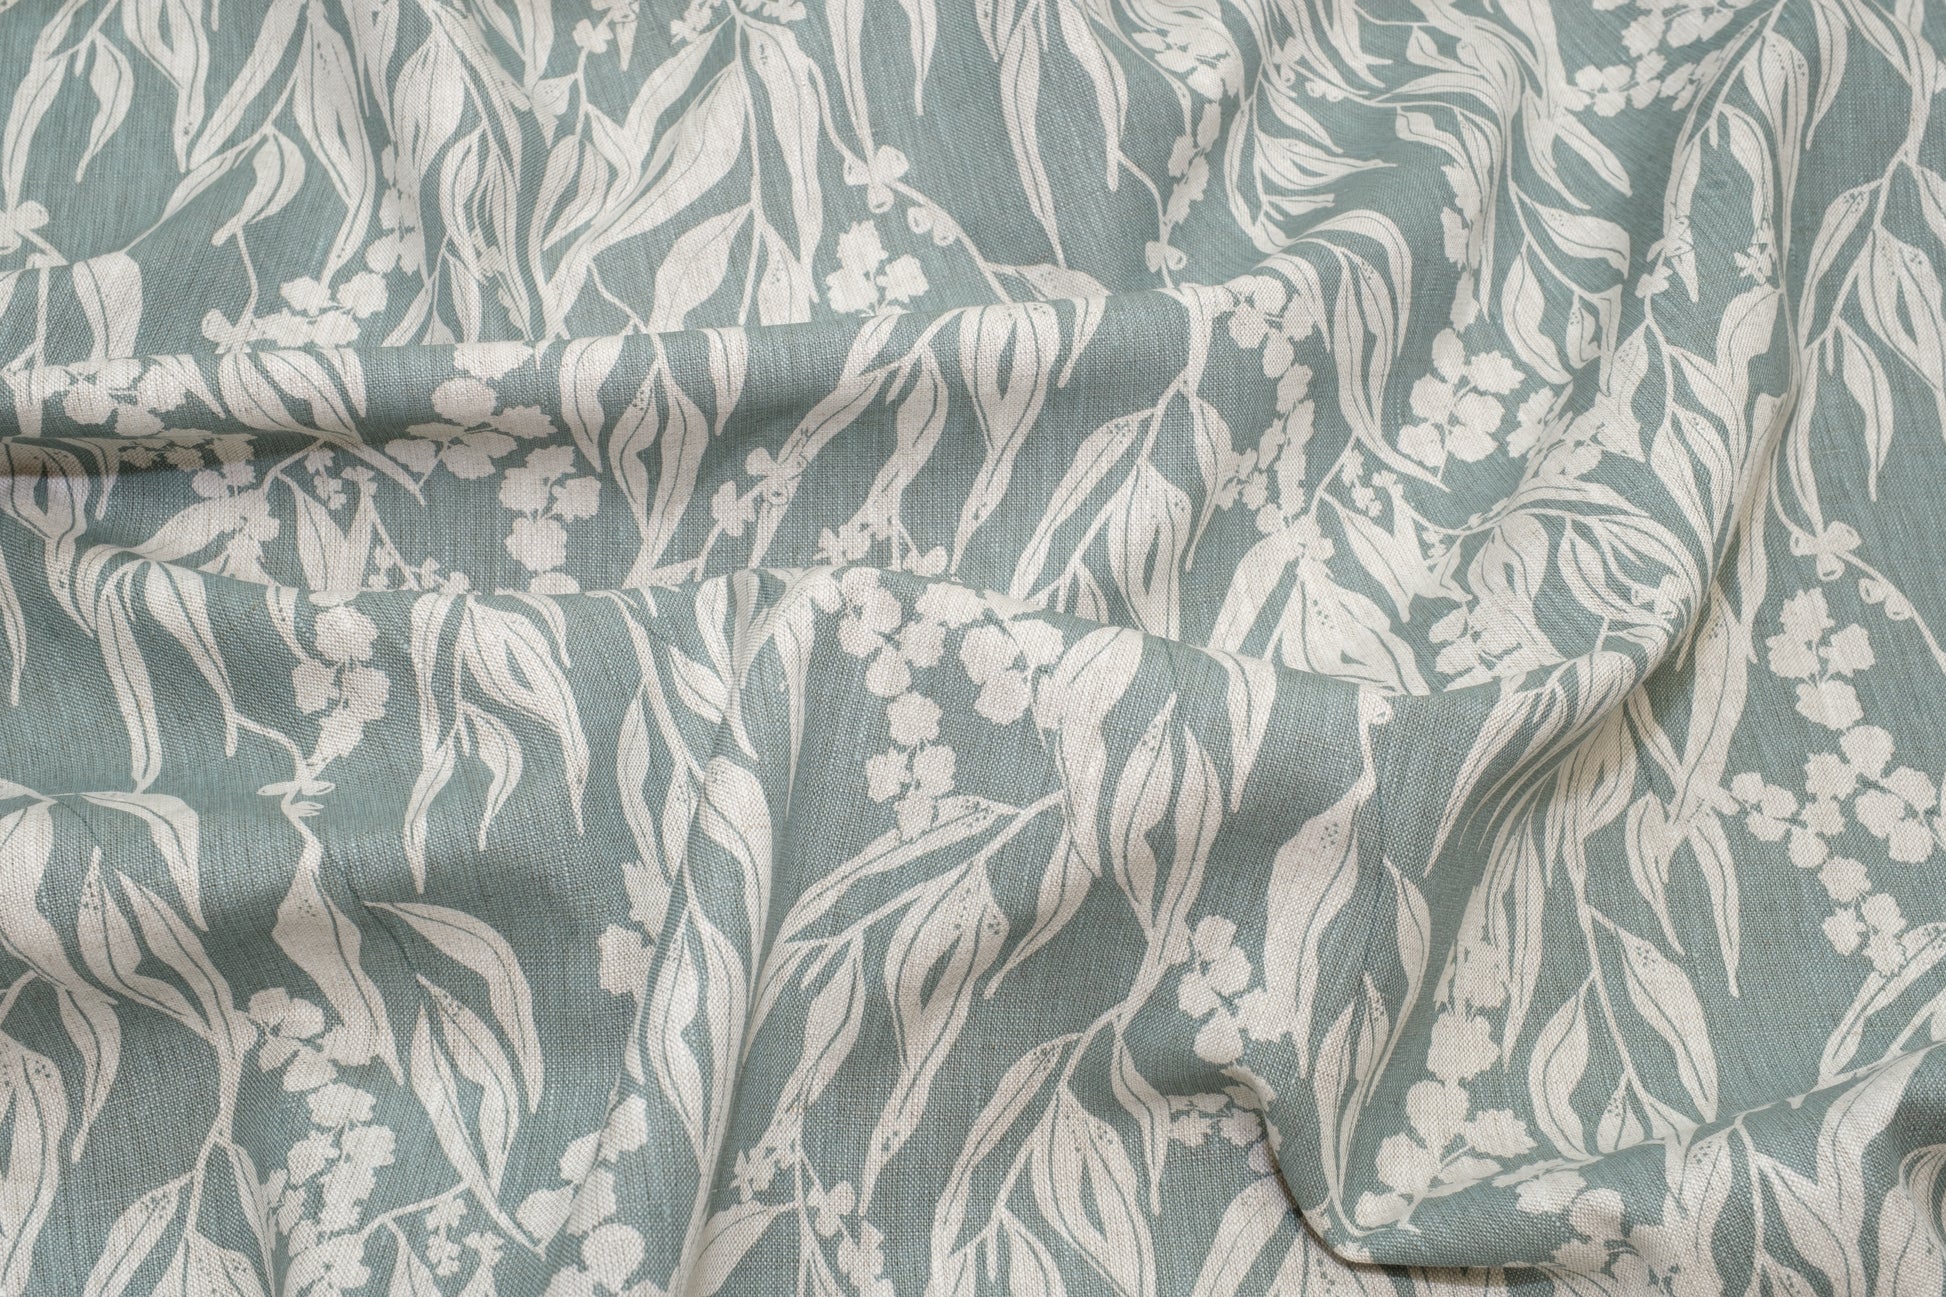 Screenprinted linen fabric by Femke Textiles featuring Nuts about Wattle in Storm on an oatmeal linen.